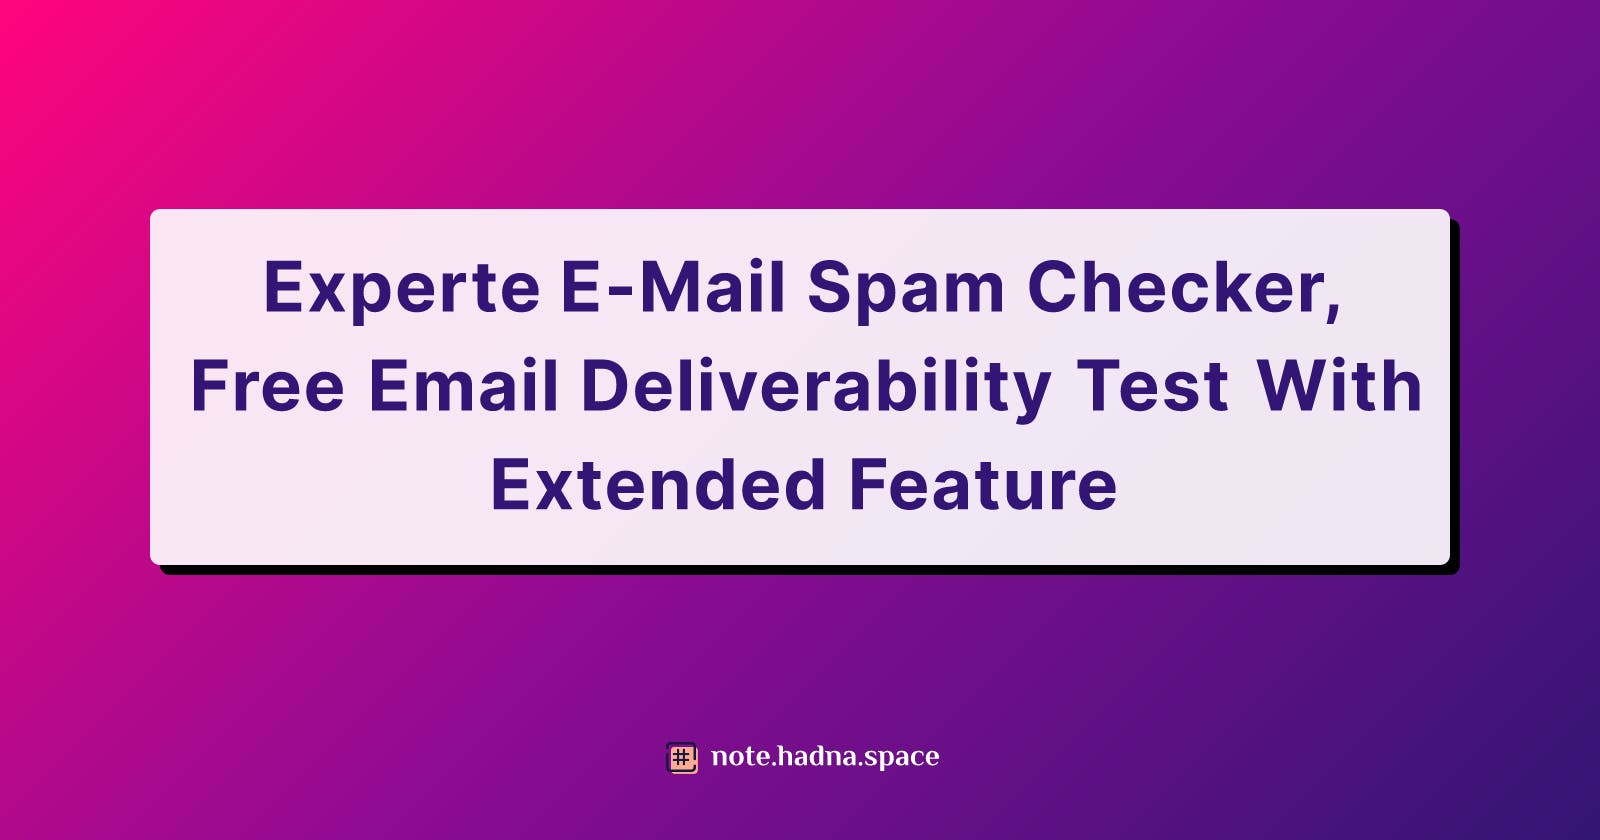 Experte E-Mail Spam Checker, Free Email Deliverability Test With Extended Feature